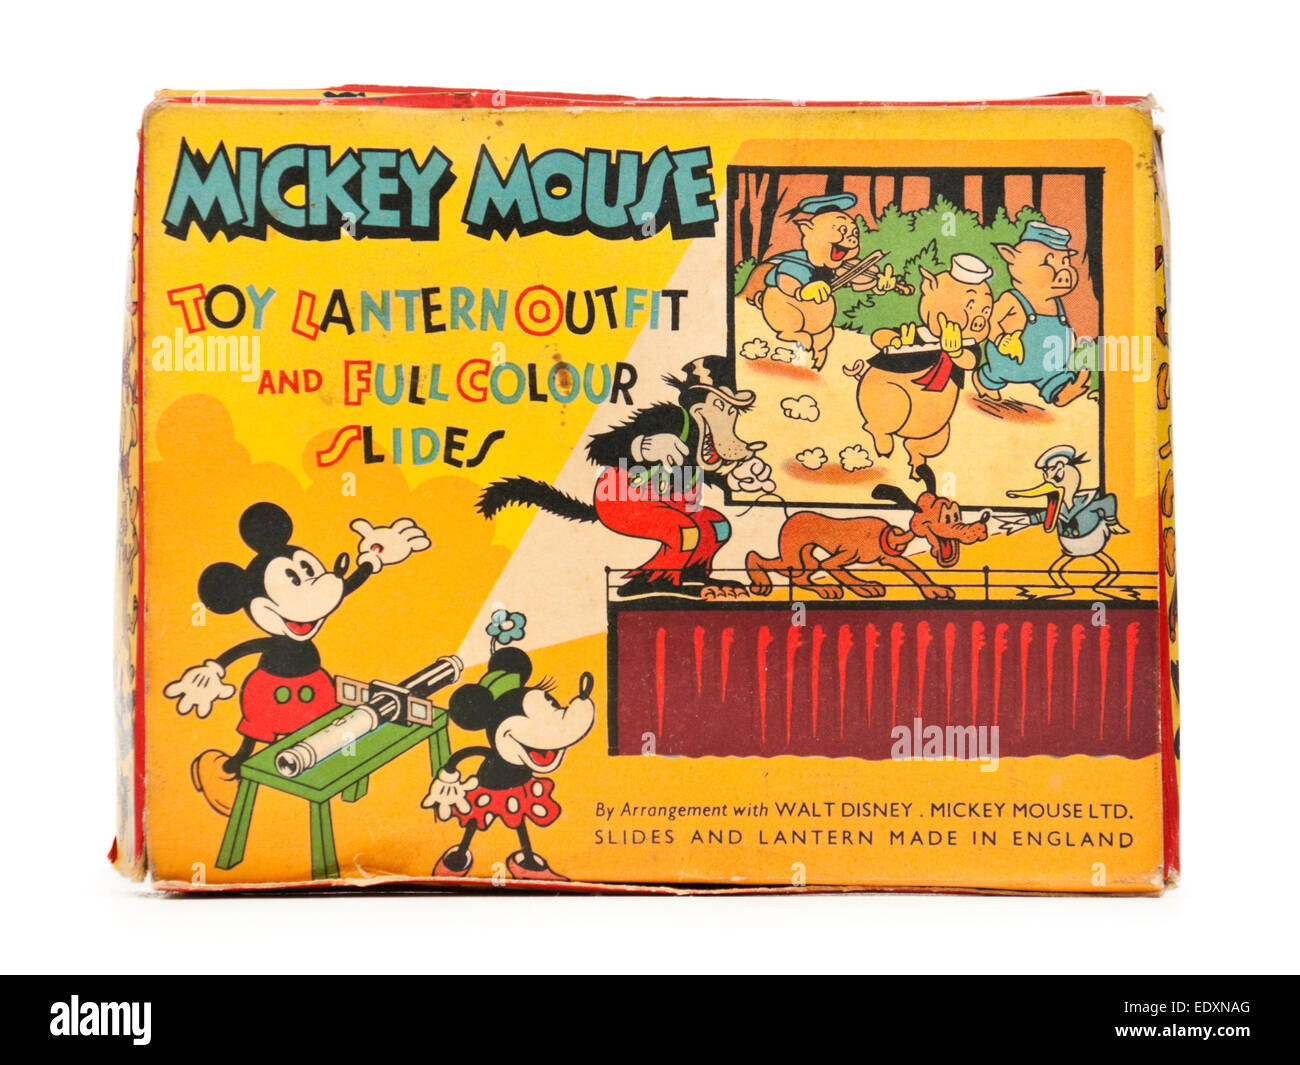 Vintage Mickey Mouse "Spielzeug Laterne Outfit" in der Originalverpackung mit Farbe Folien Stockfoto